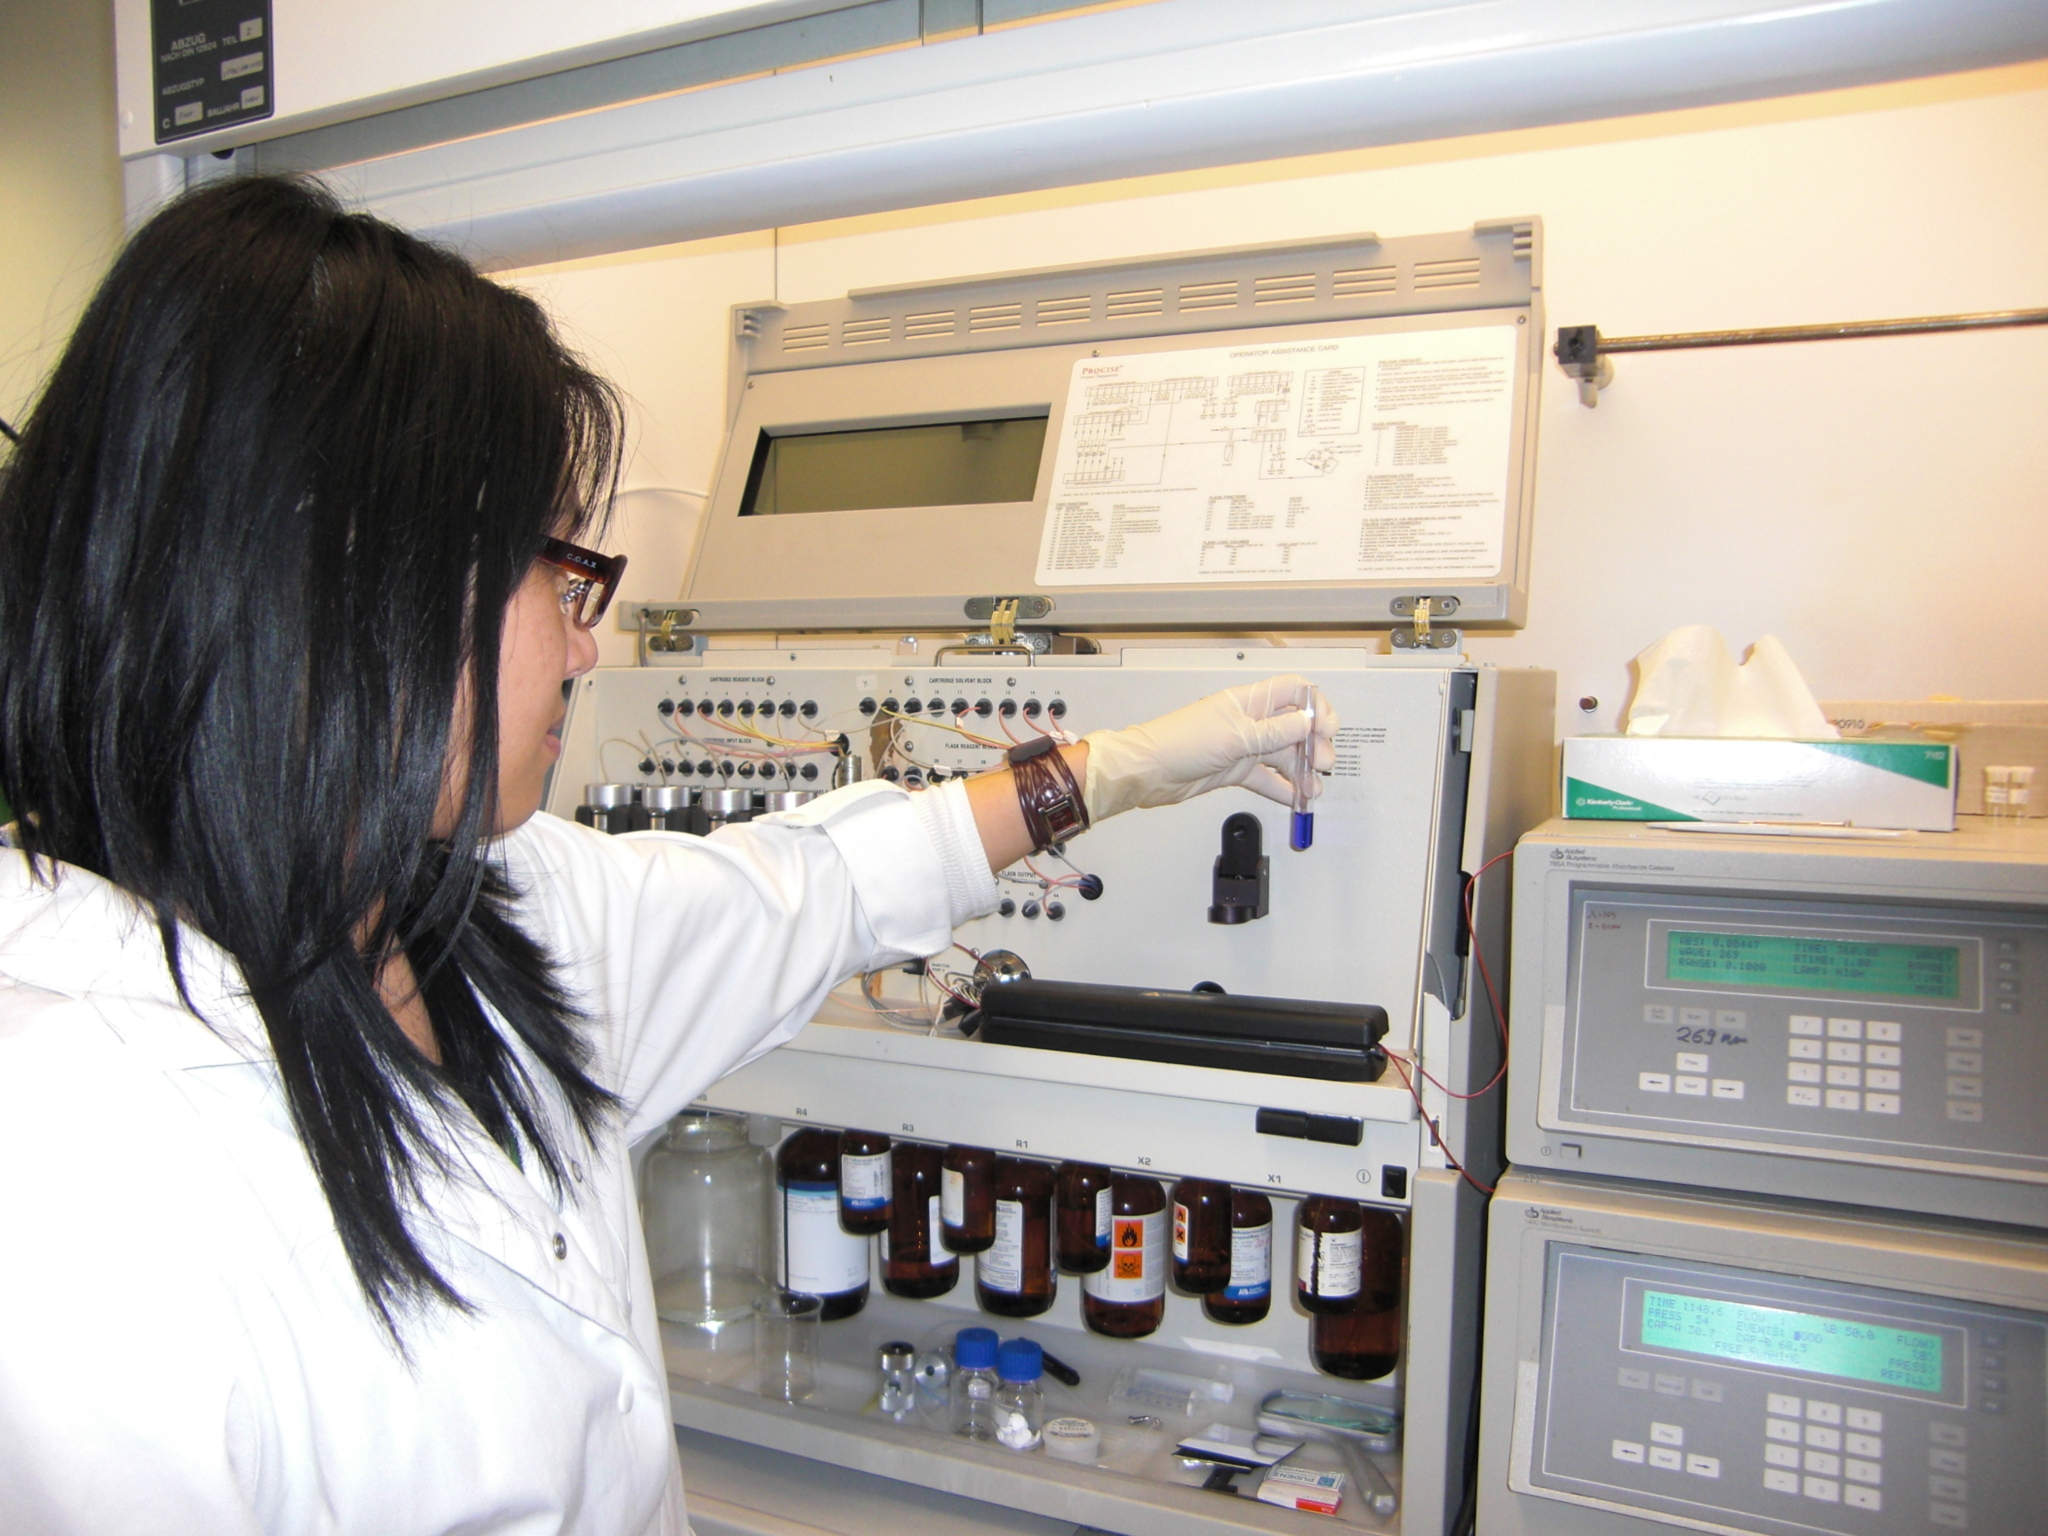 Scientist in the laboratory of Przybylski's reserach group at the University of Constance holding a test tube in her hand and standing in front of an analysis device.